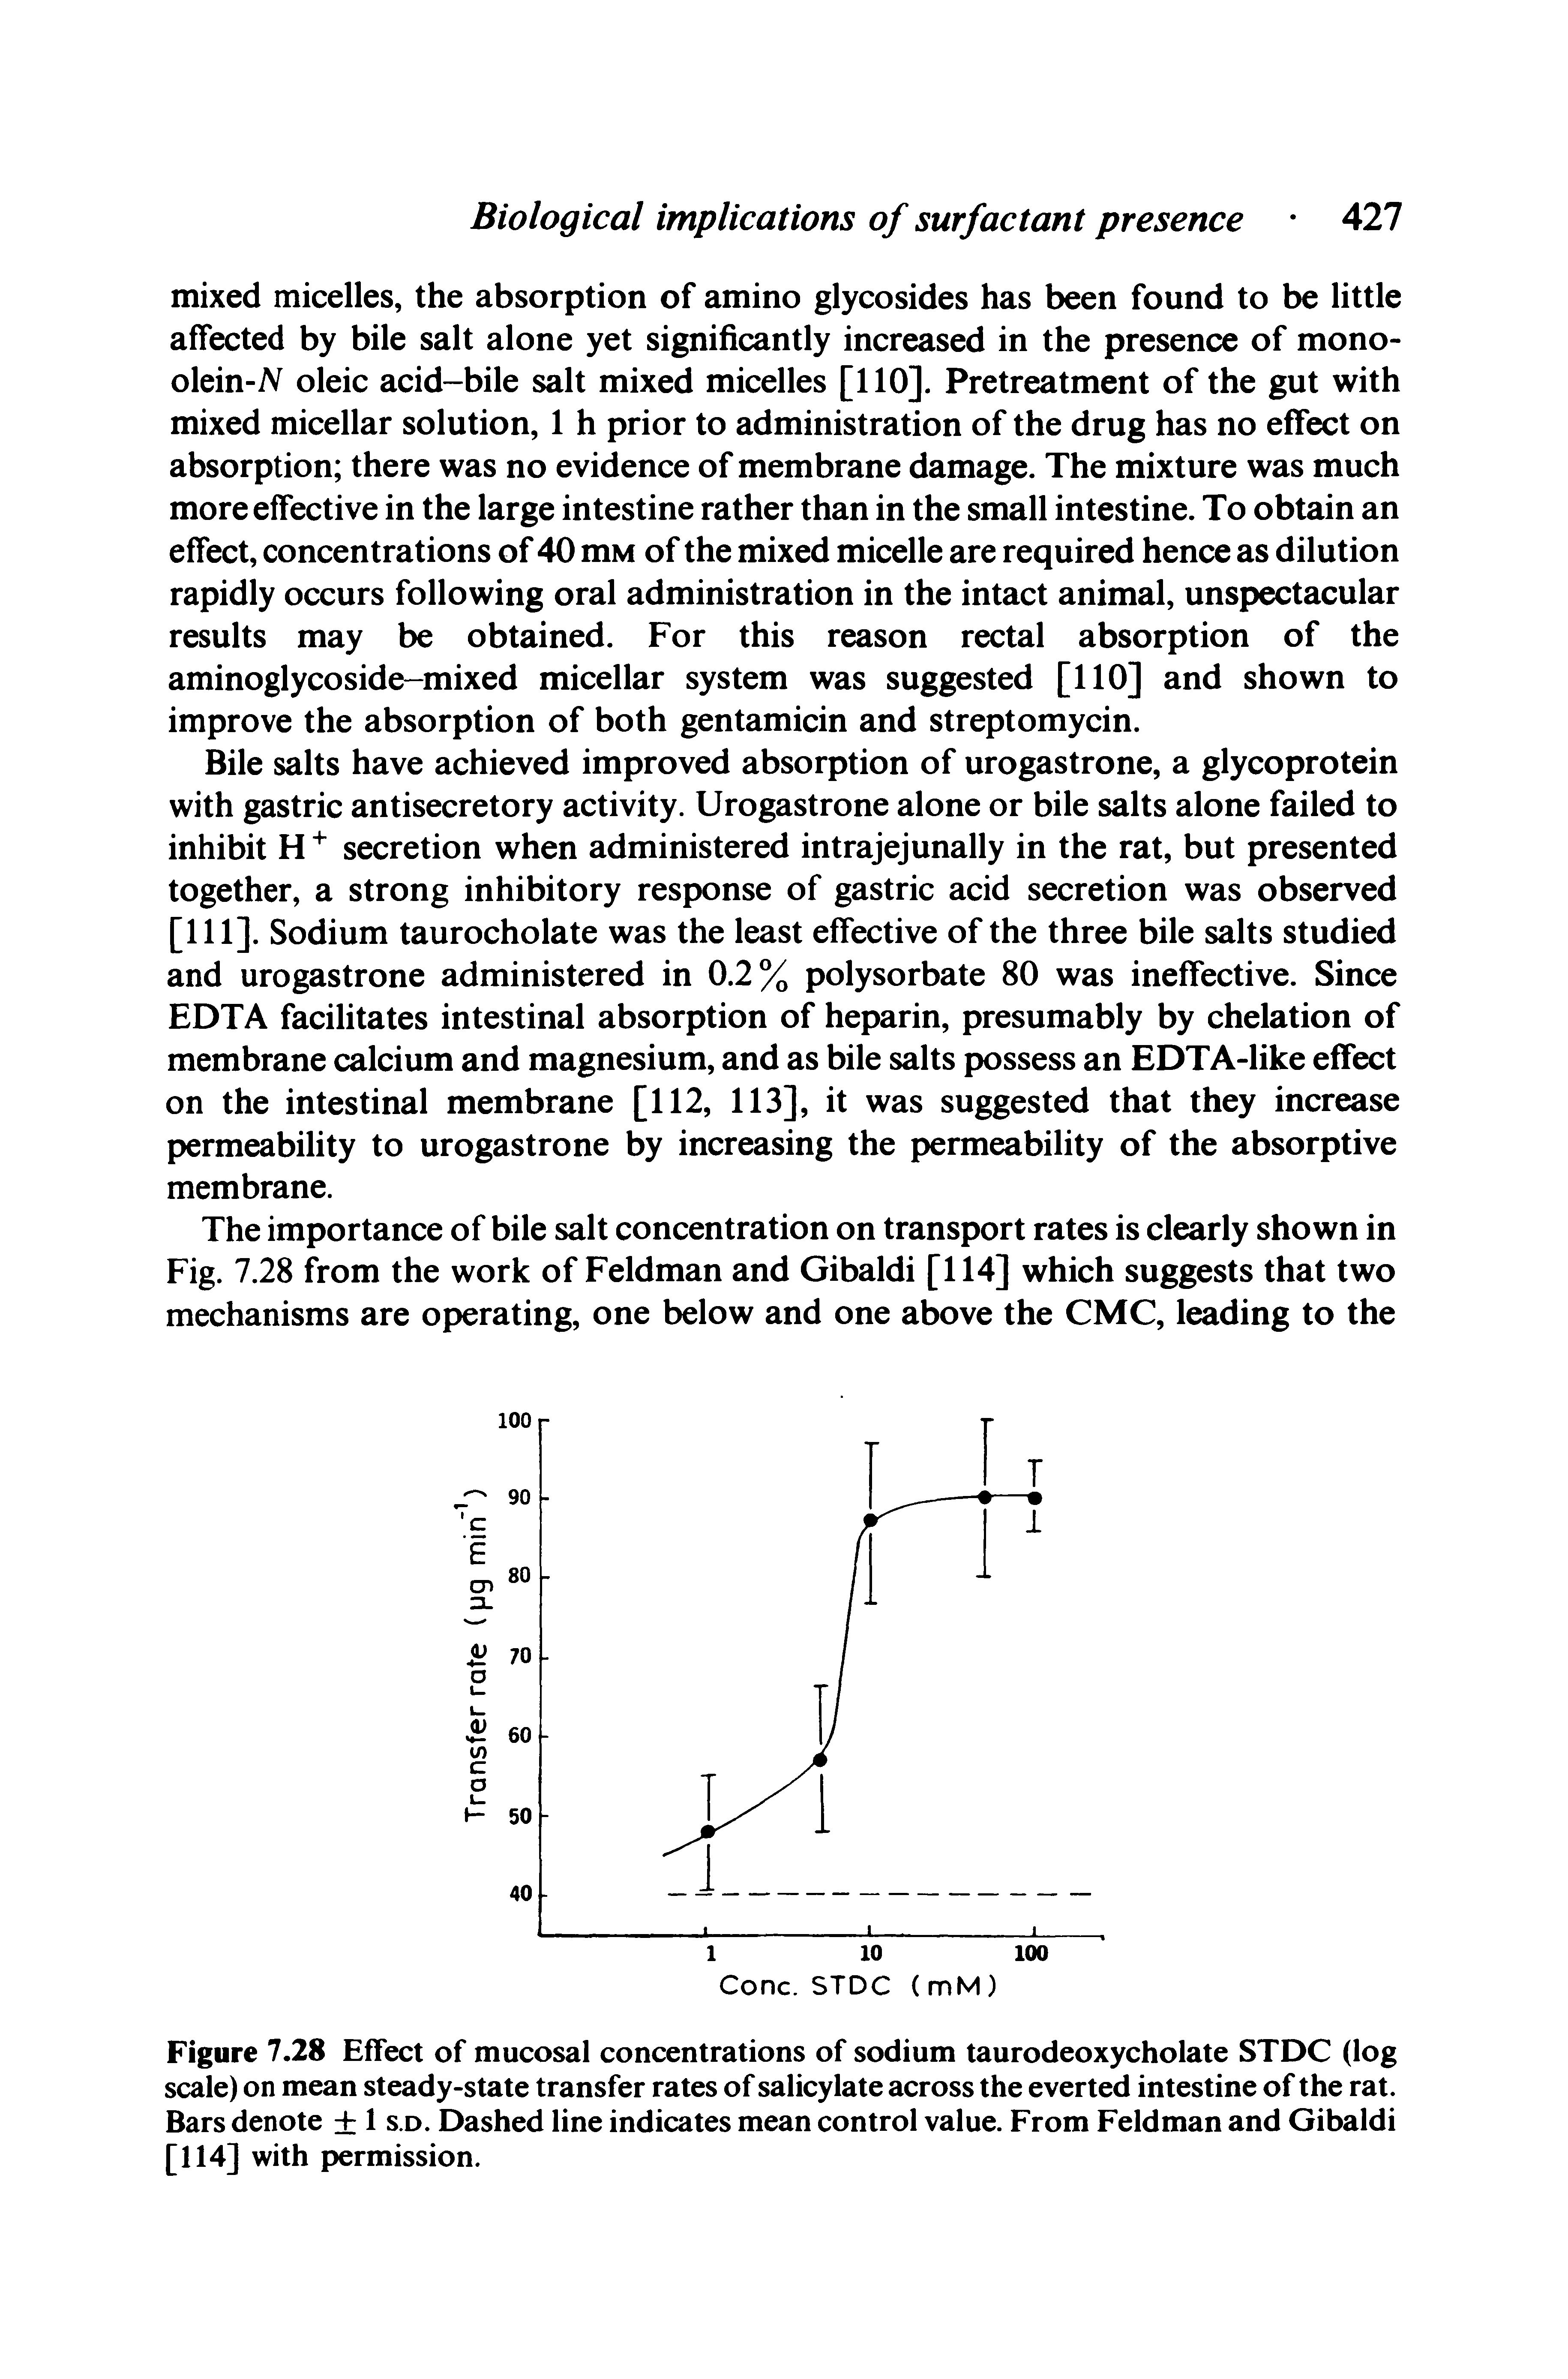 Figure 7.28 Effect of mucosal concentrations of sodium taurodeoxycholate STDC (log scale) on mean steady-state transfer rates of salicylate across the everted intestine of the rat. Bars denote 1 s.d. Dashed line indicates mean control value. From Feldman and Gibaldi [114] with permission.